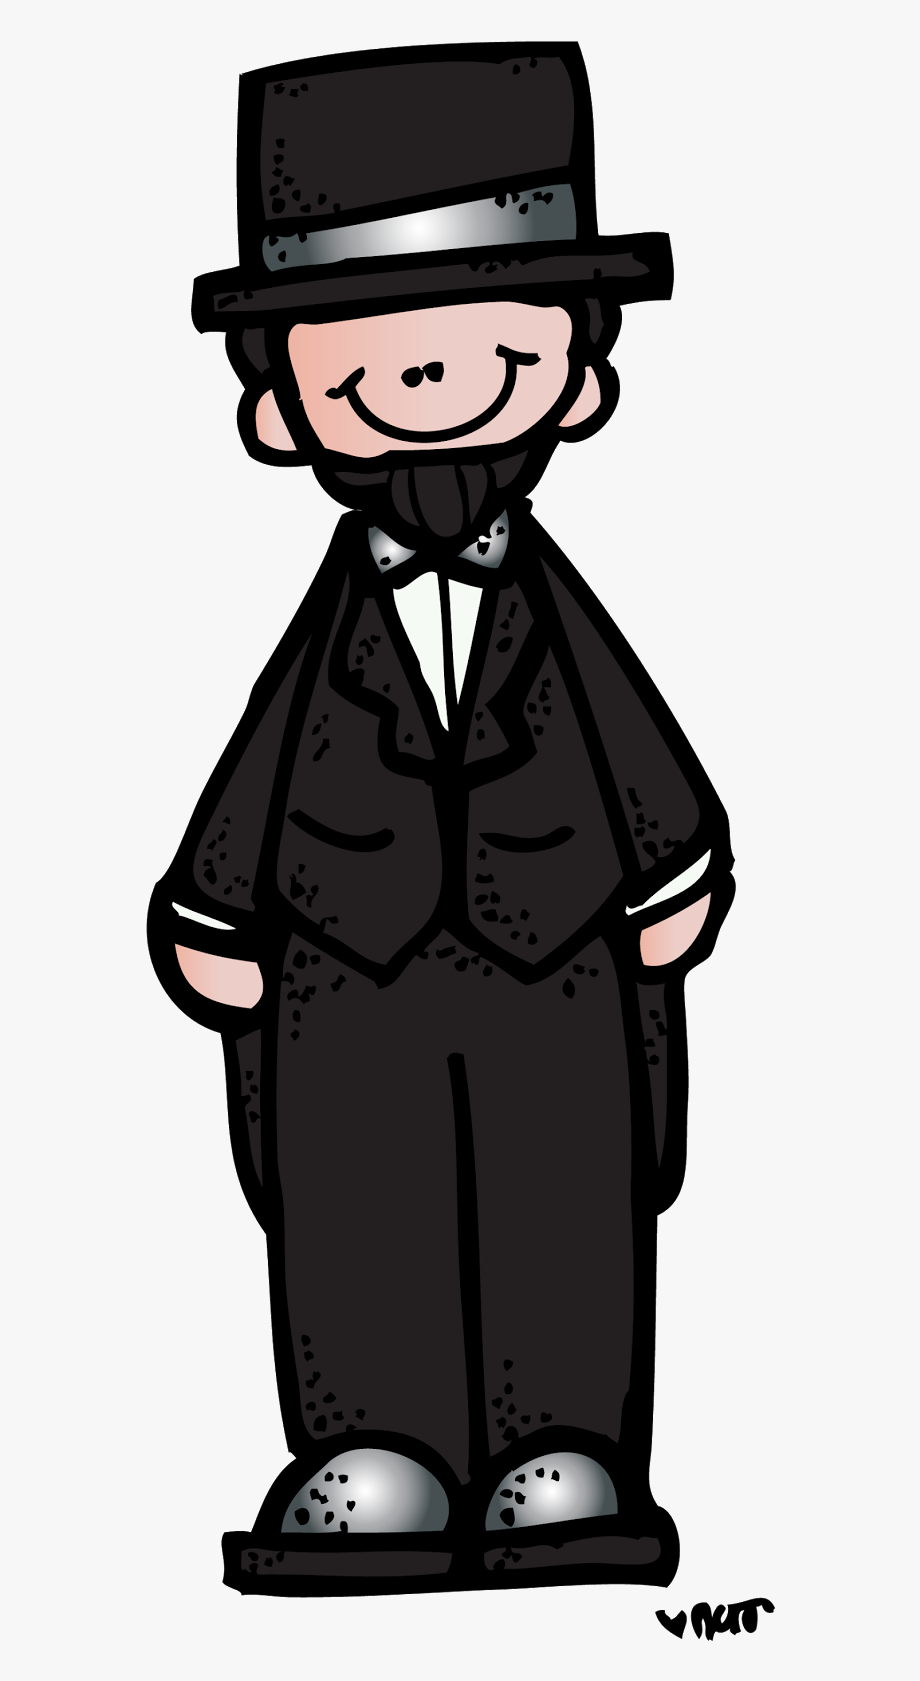 Abraham lincoln clipart animated, Abraham lincoln animated Transparent